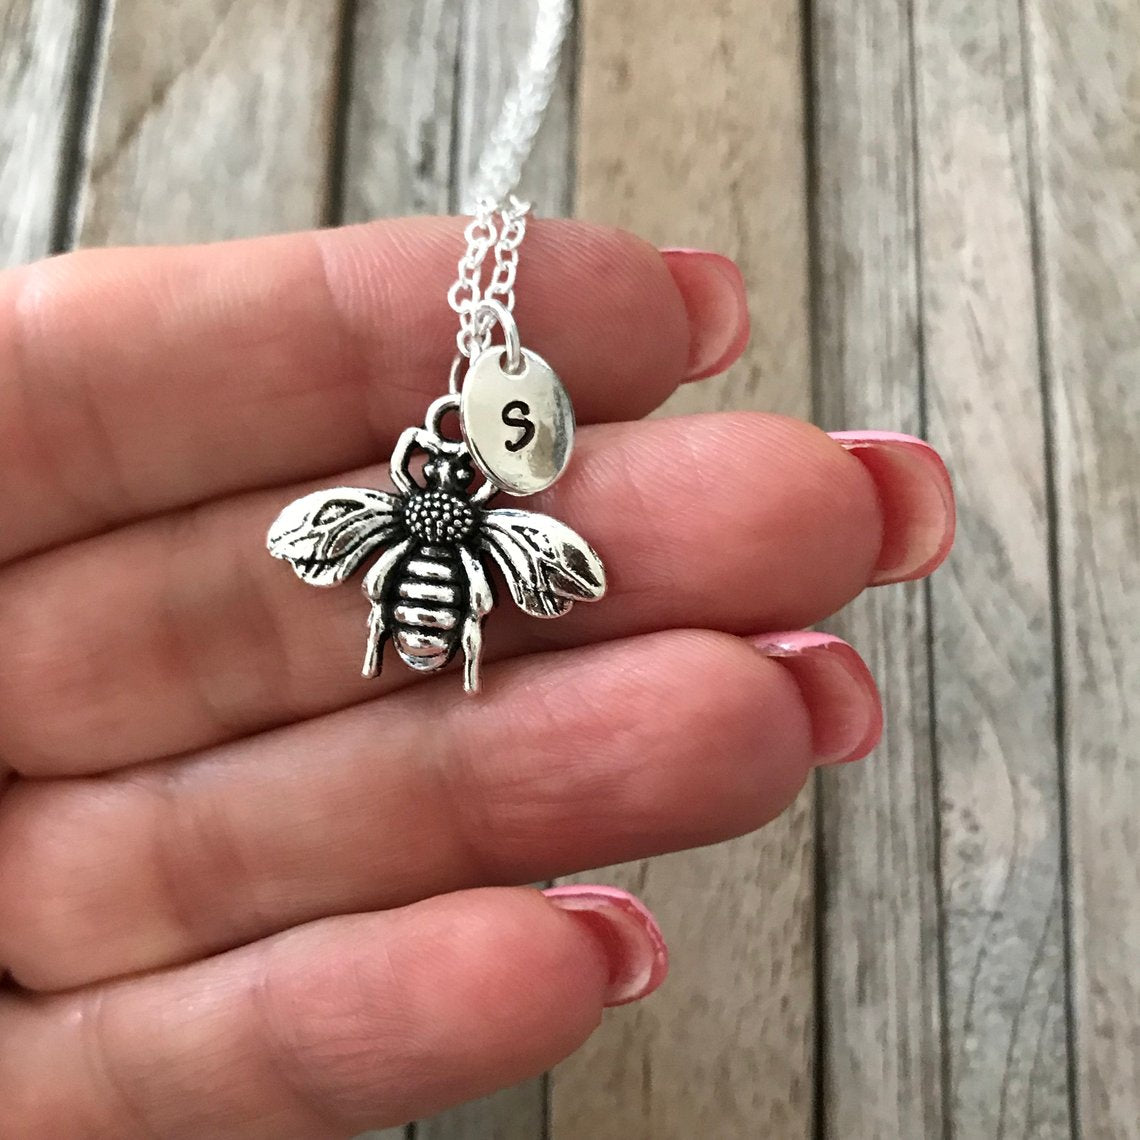 Personalized bumble bee necklace, Bee necklace, Silver bee charm, Honey bee jewelry